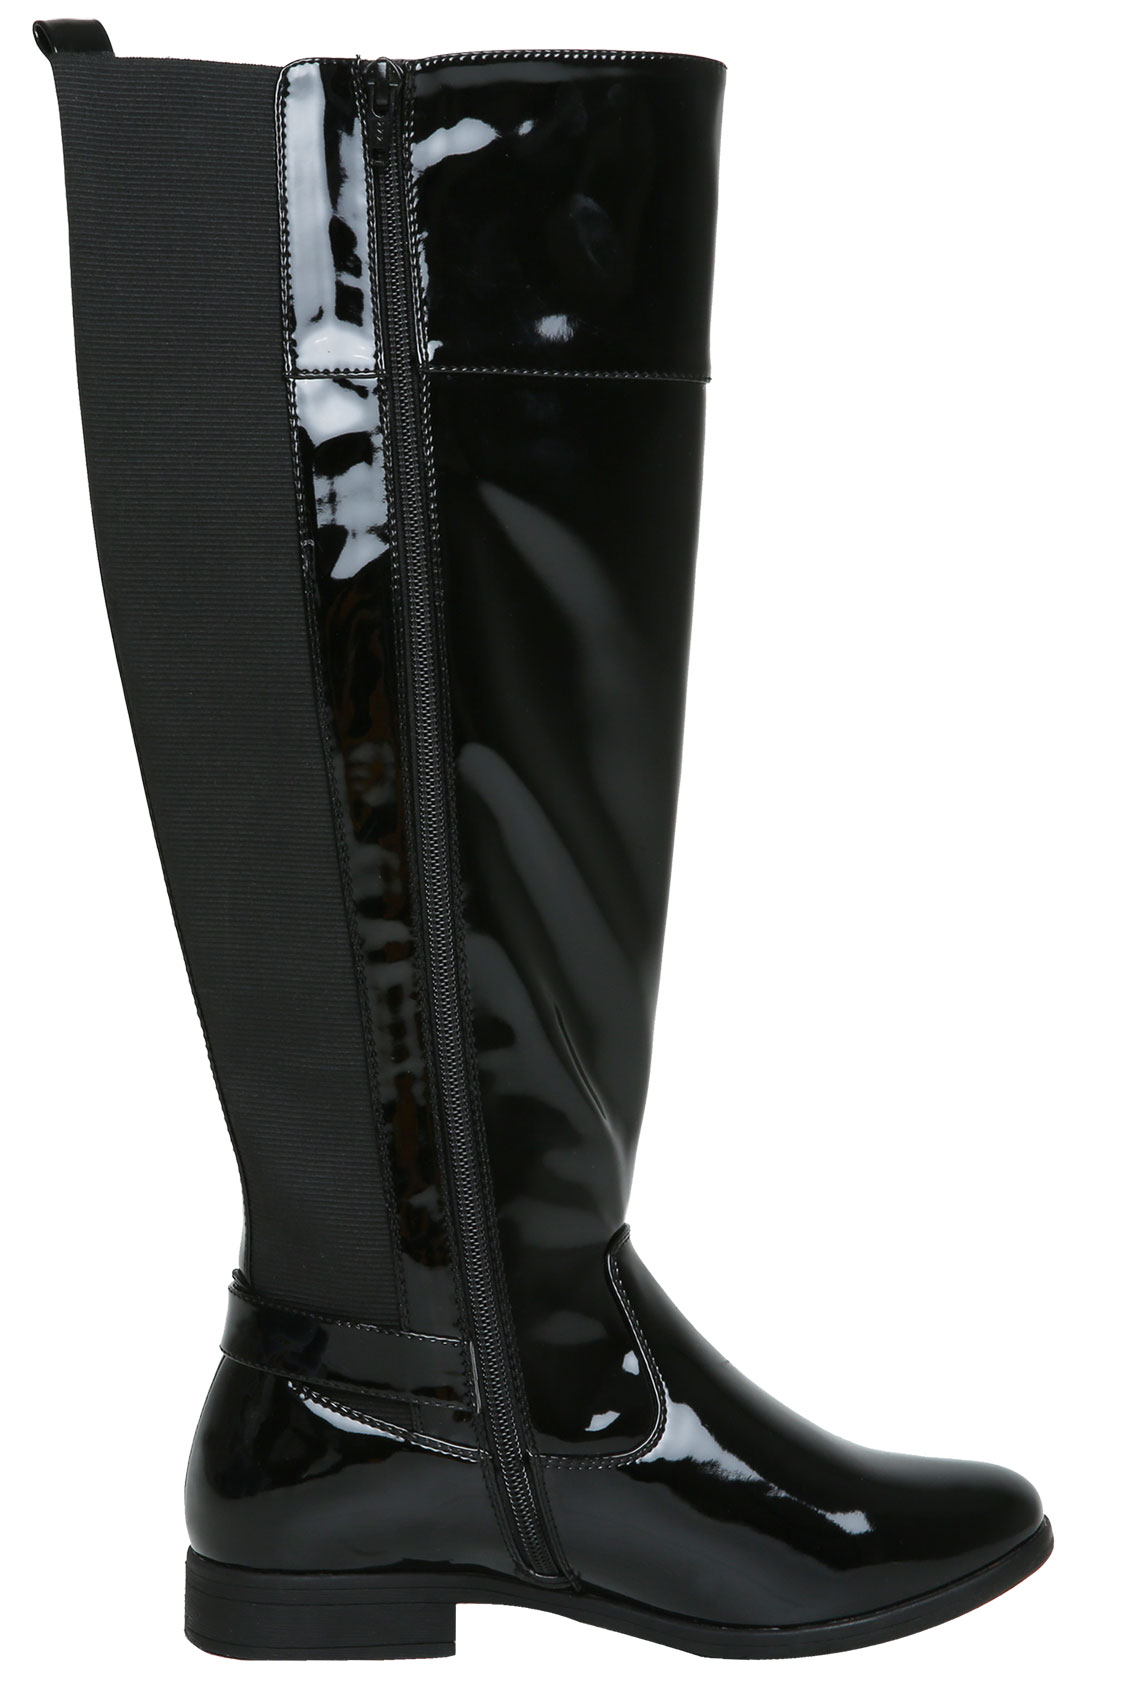 Black Patent Stretch Long Boot With Buckle Trim & EEE Fitting, 4EEE 